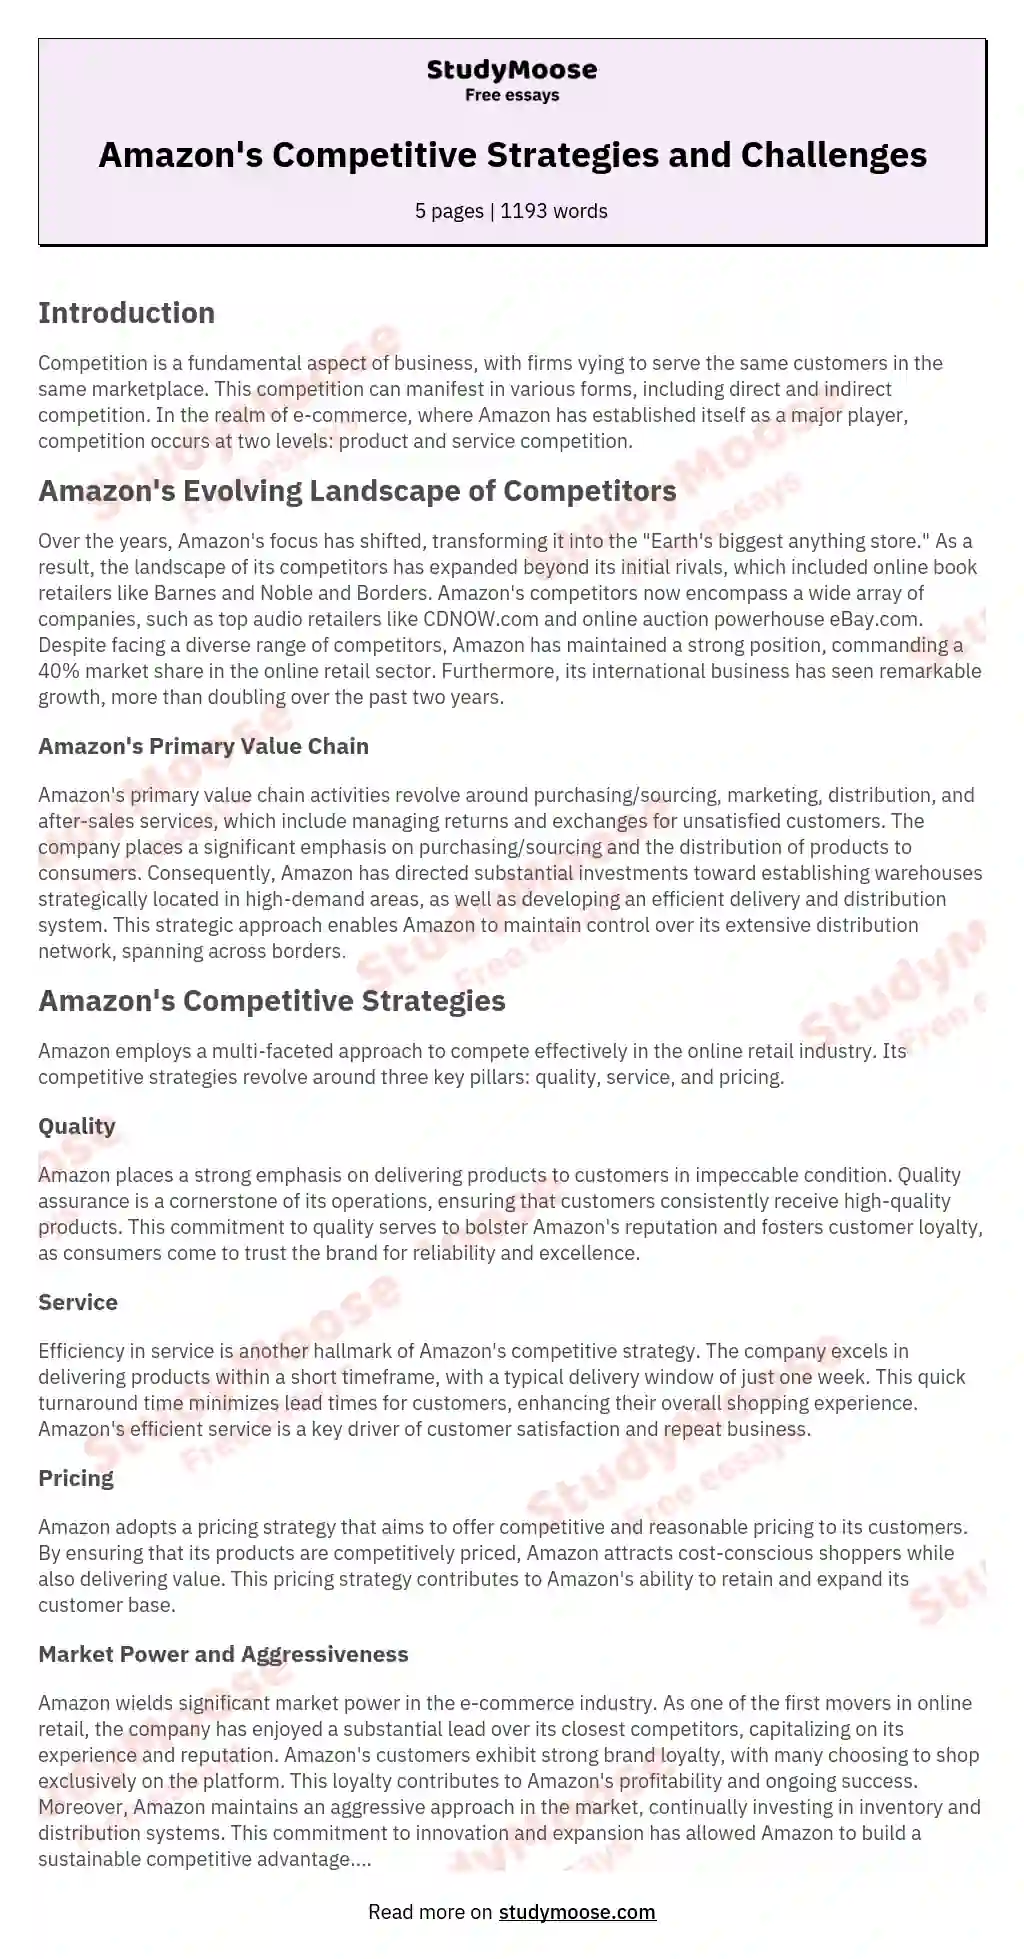 Amazon's Competitive Strategies and Challenges essay